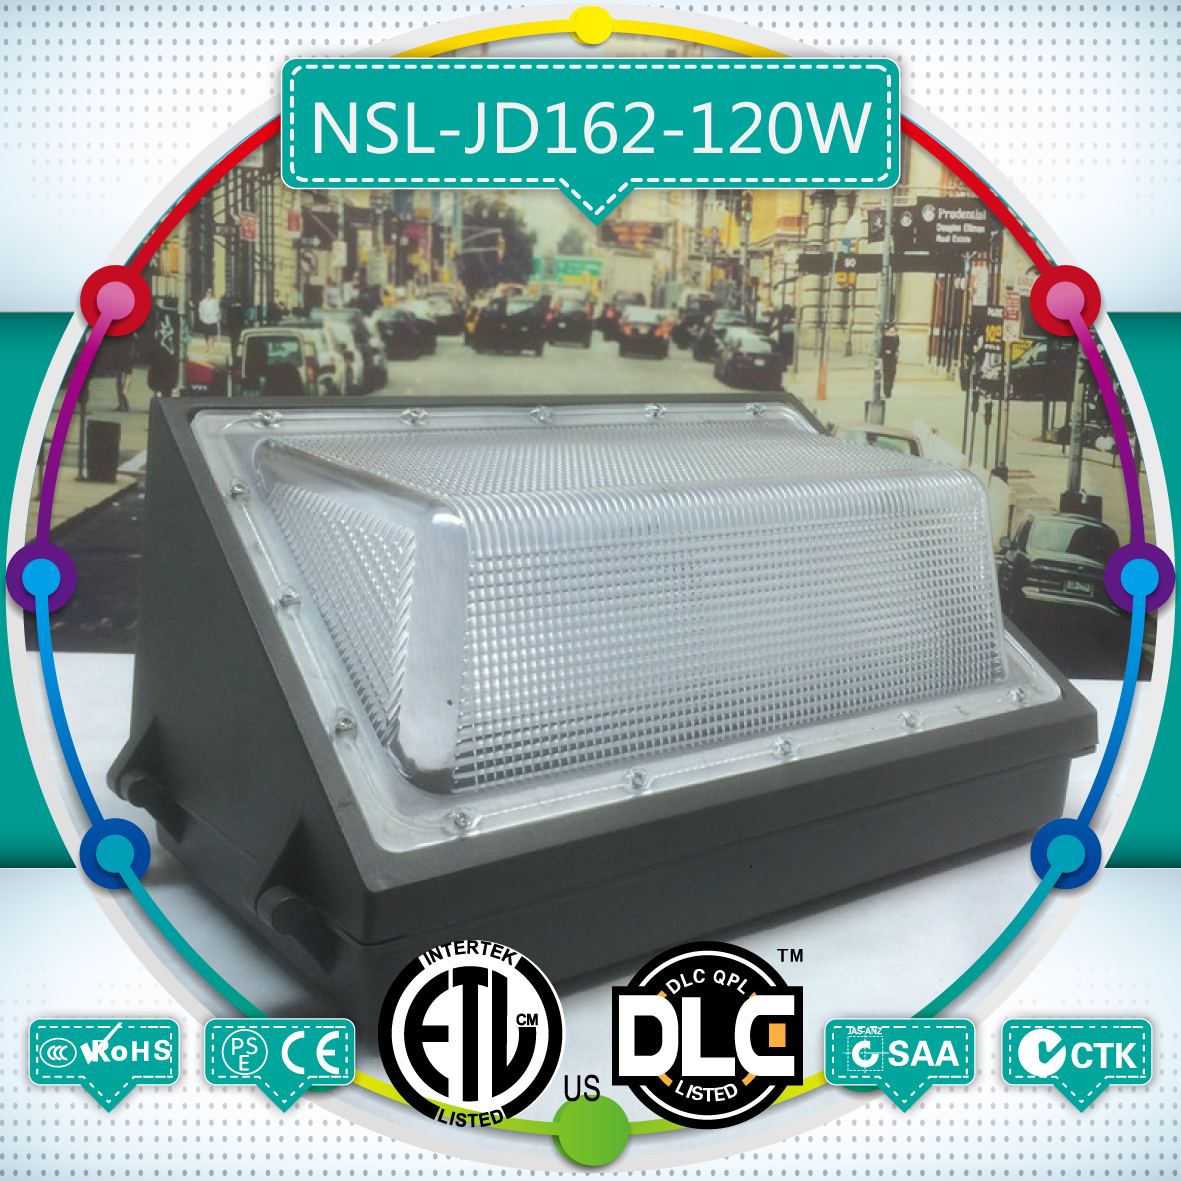 Sample free of charge120w led wall pack high power dlc led wall pack light 5 years warranty led wa